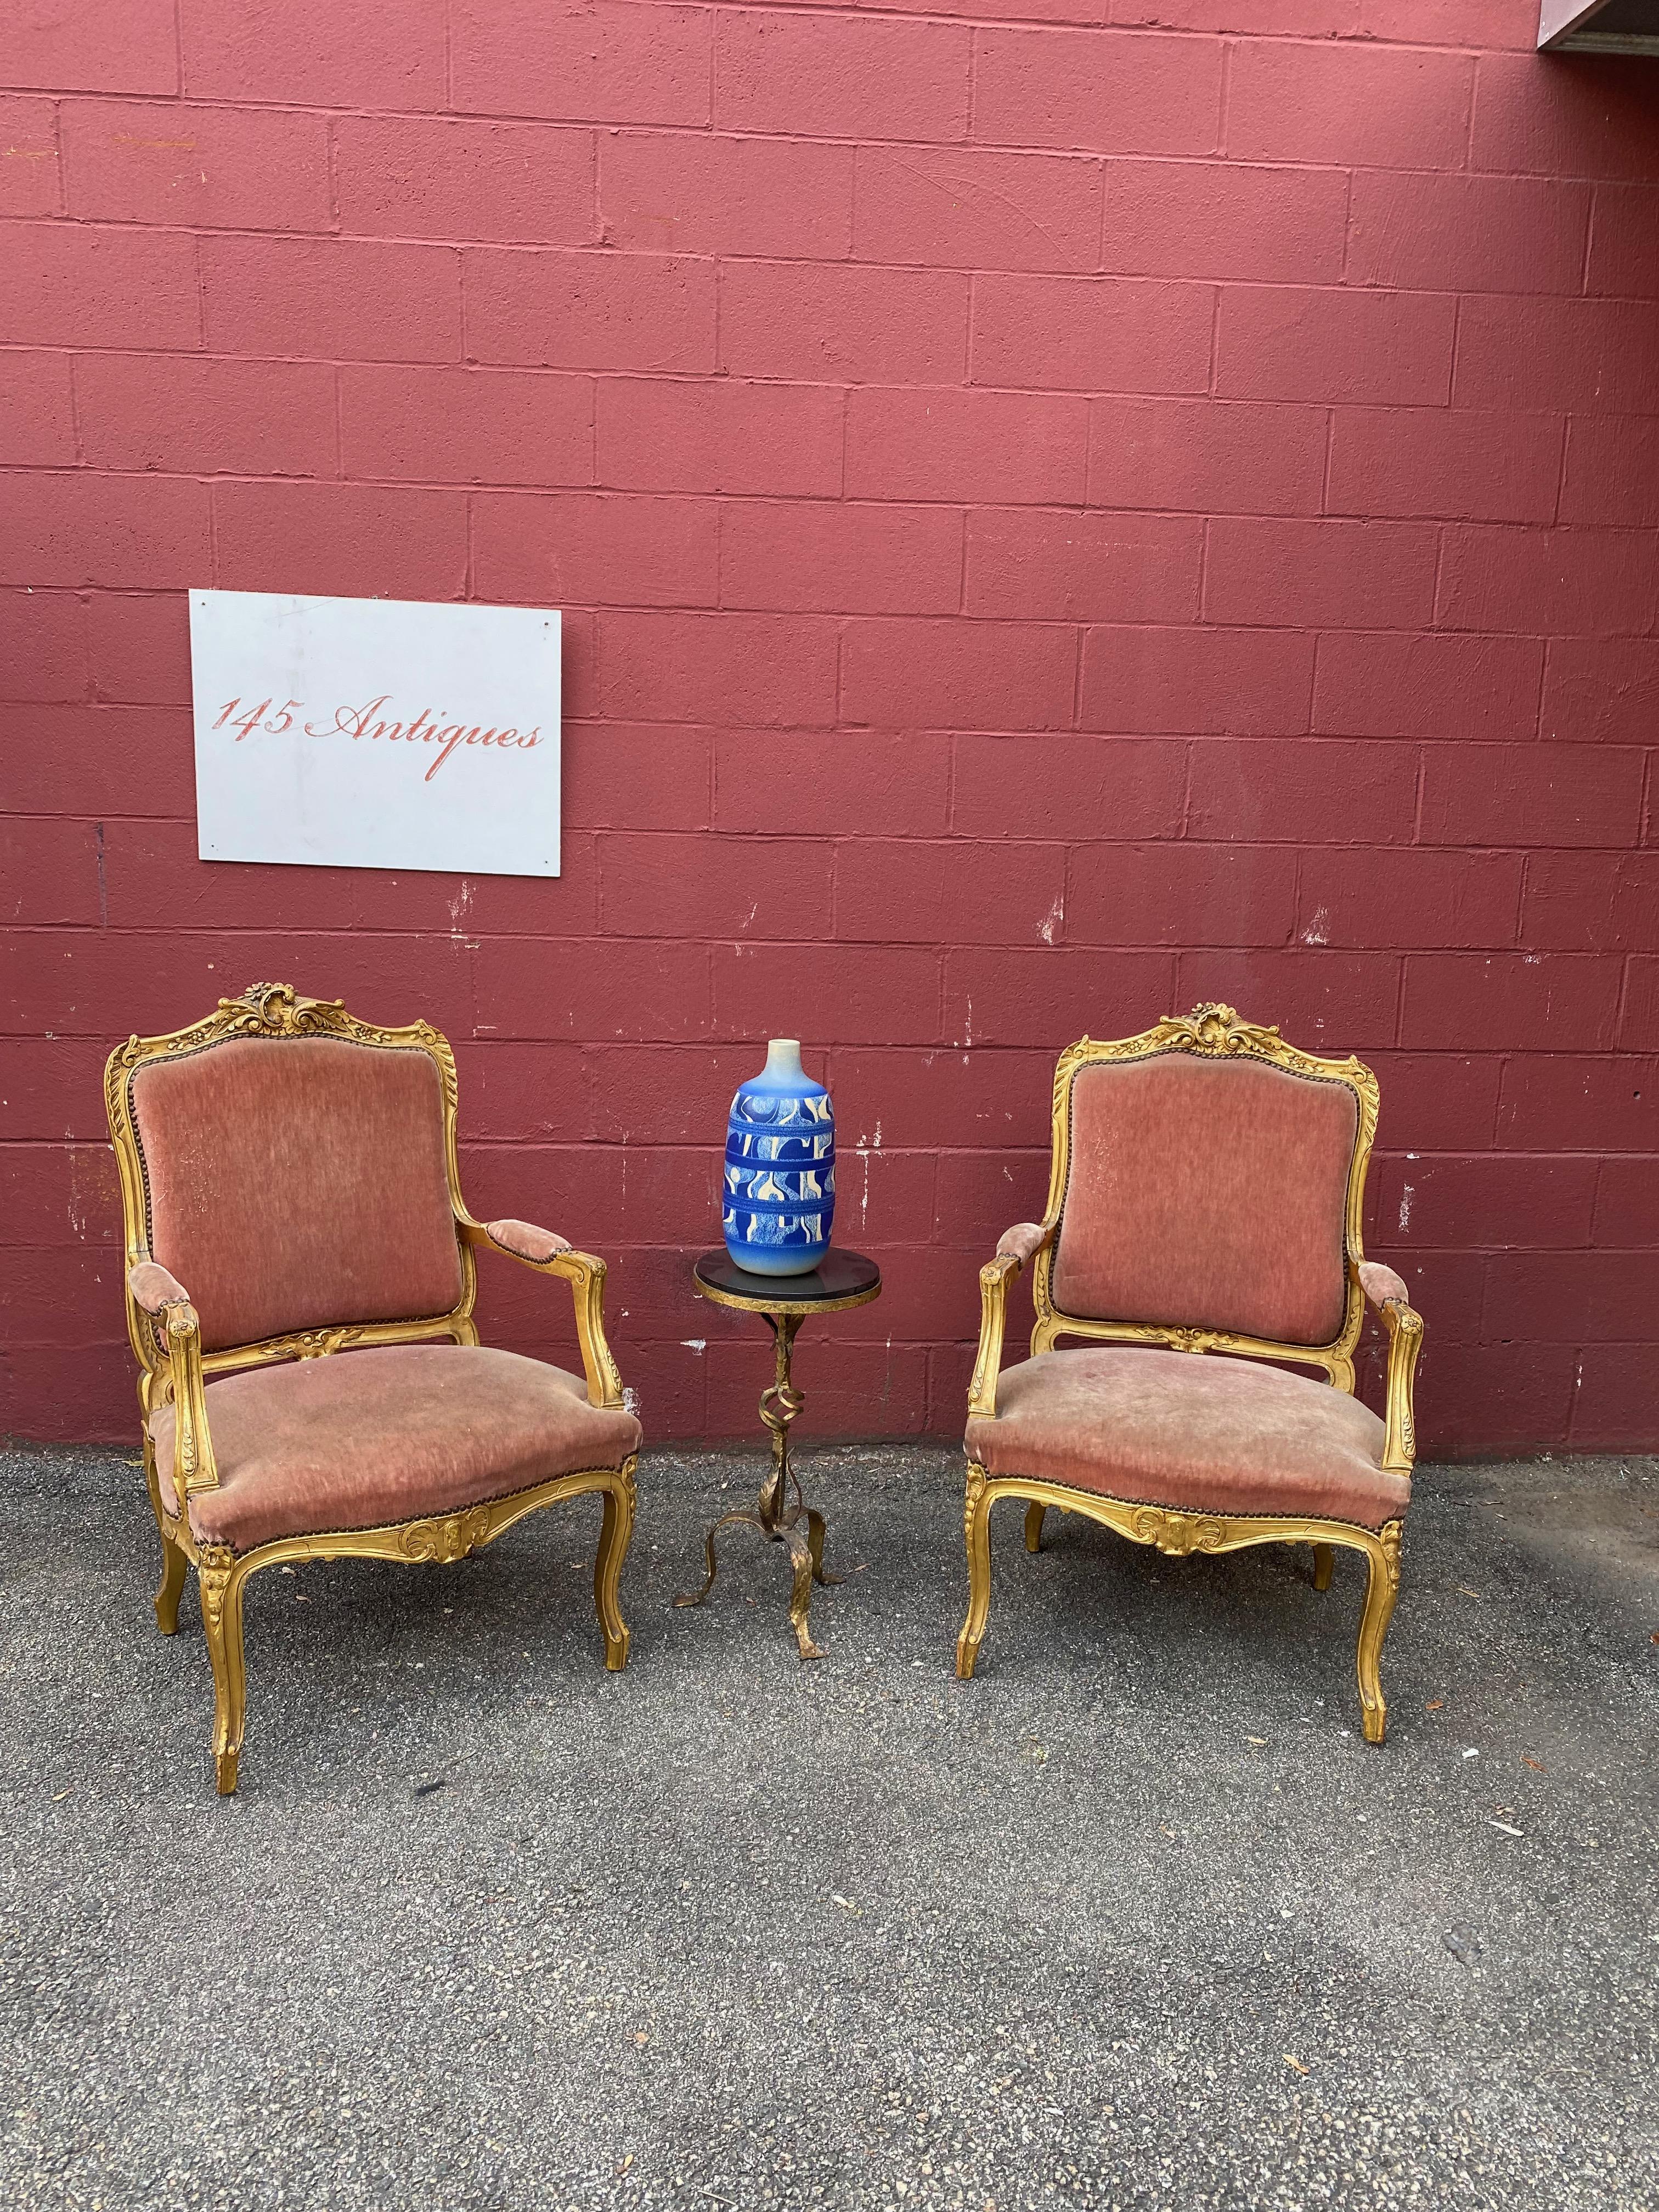 Pair of French Louis XV Style Gilt Armchairs in Faded Salmon Velvet 14